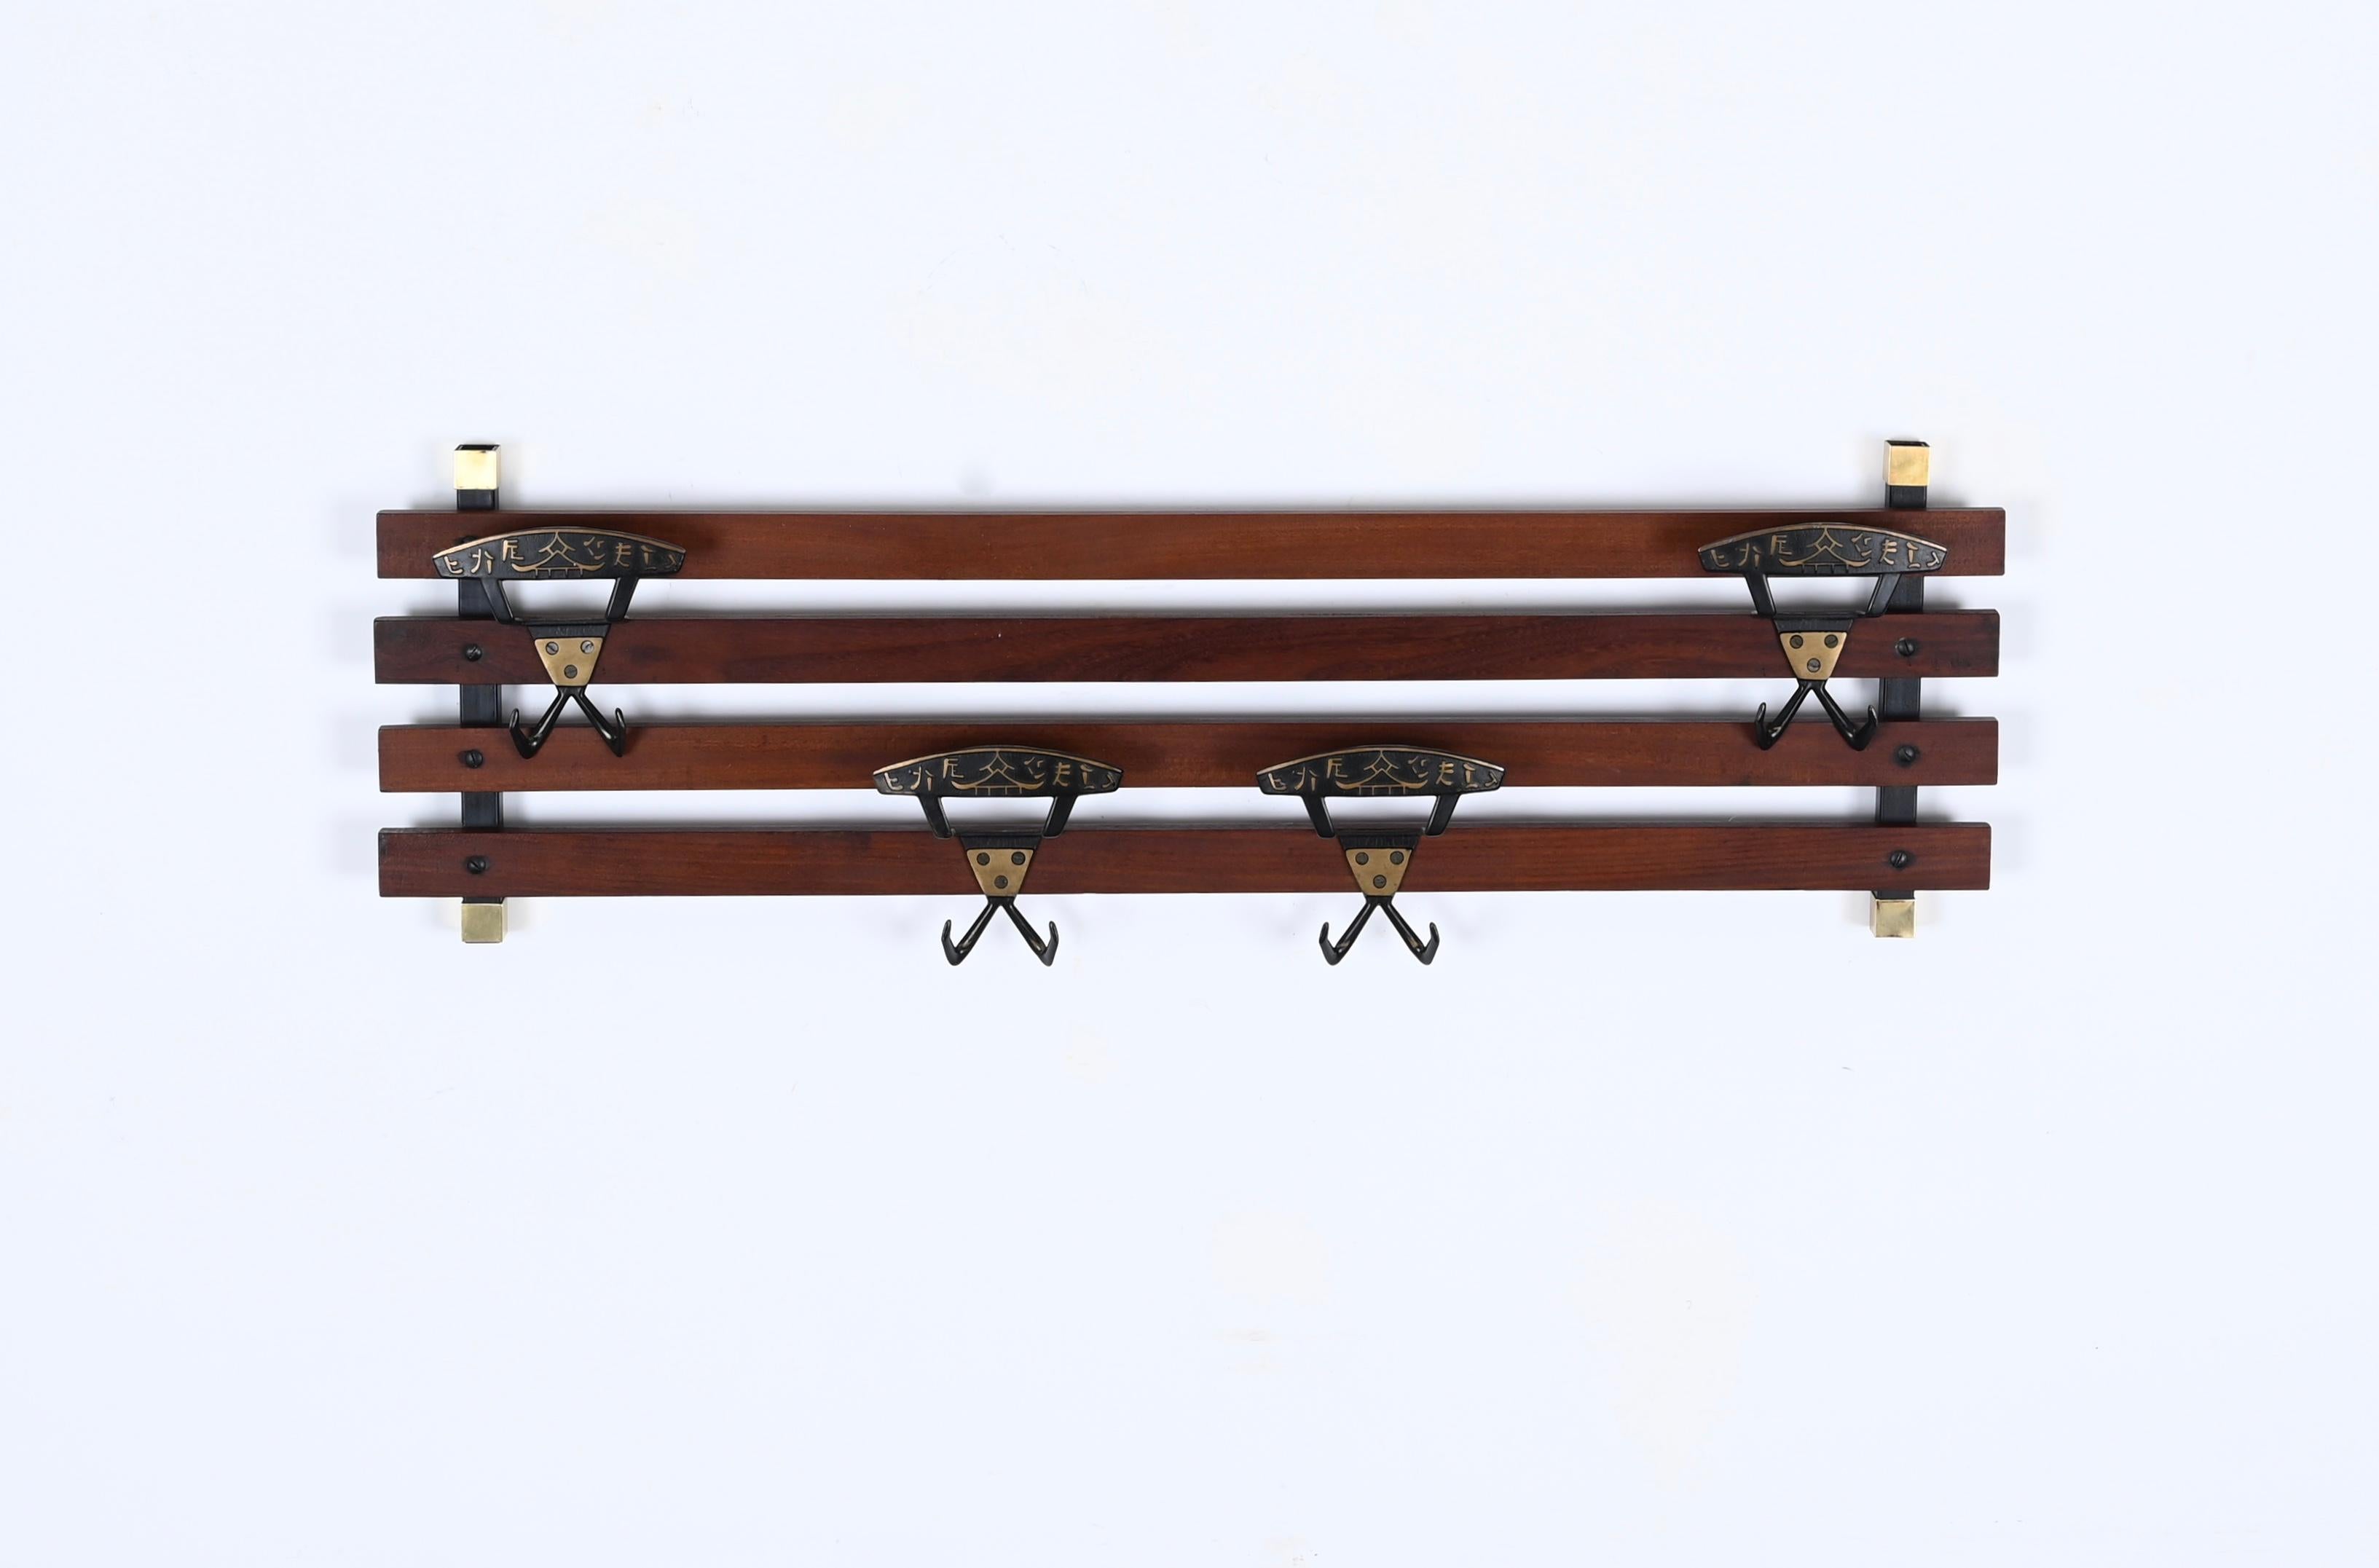 Gorgeous coat rack in teak wood, brass and enameled metal. This lovely piece was realized in Italy in the 1960s.

This elegant coat rack has two black enameled iron supports with brass accents connected by four solid teak wood bands. The sturdy